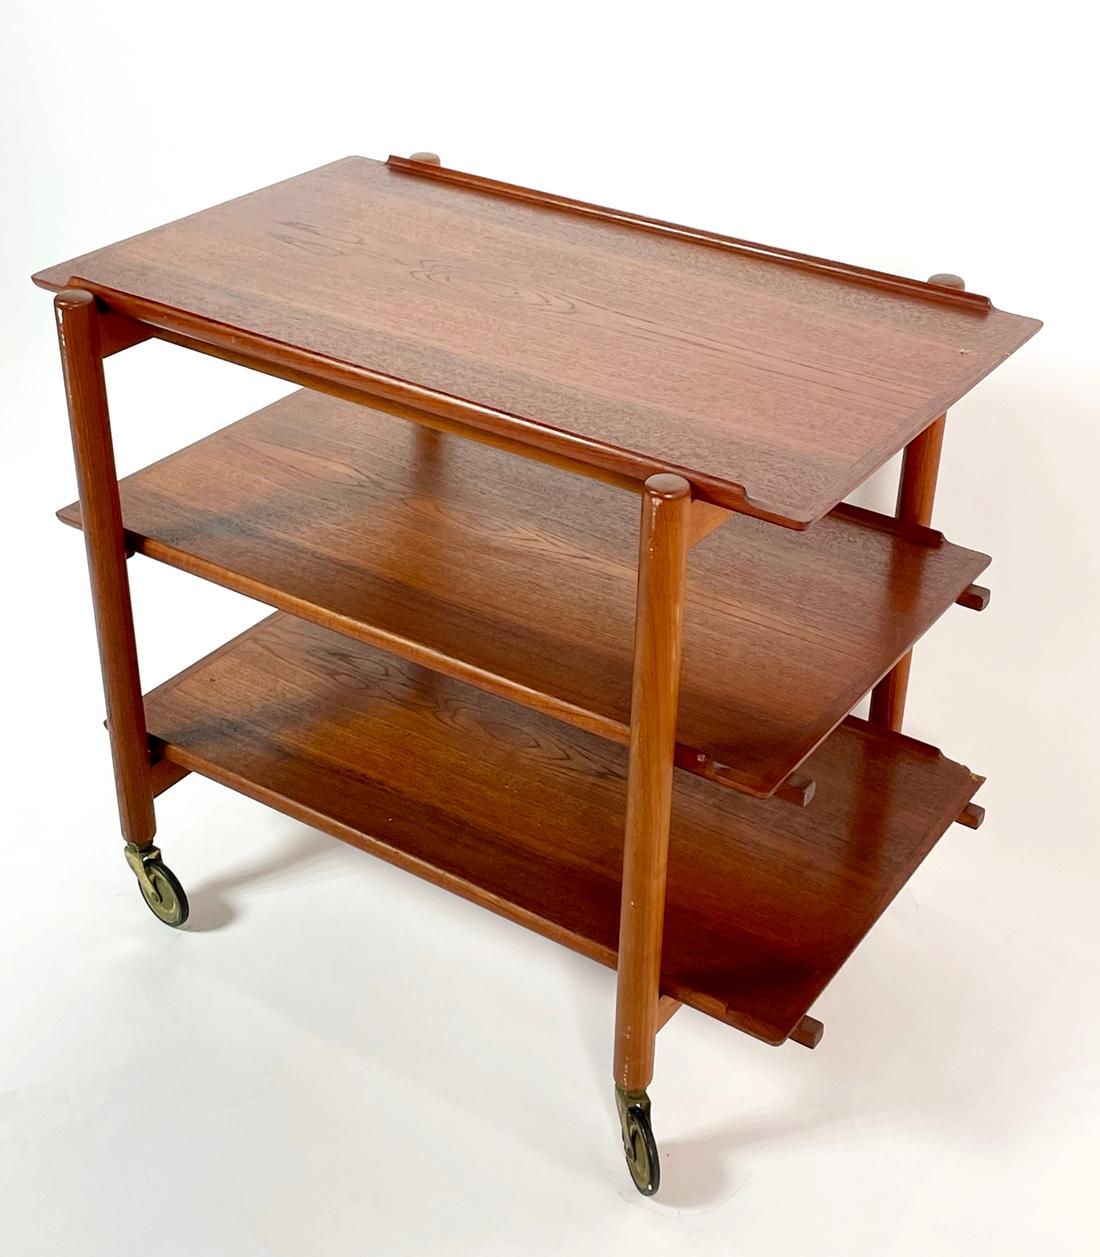 A 3-tier teak Danish modern bar cart / trolley on castors designed by Poul Hundevad, Denmark, circa 1960. Versatile configuration featuring a 3 tray design, 2 removable for serving or 1 may be attached to top level extending work or display